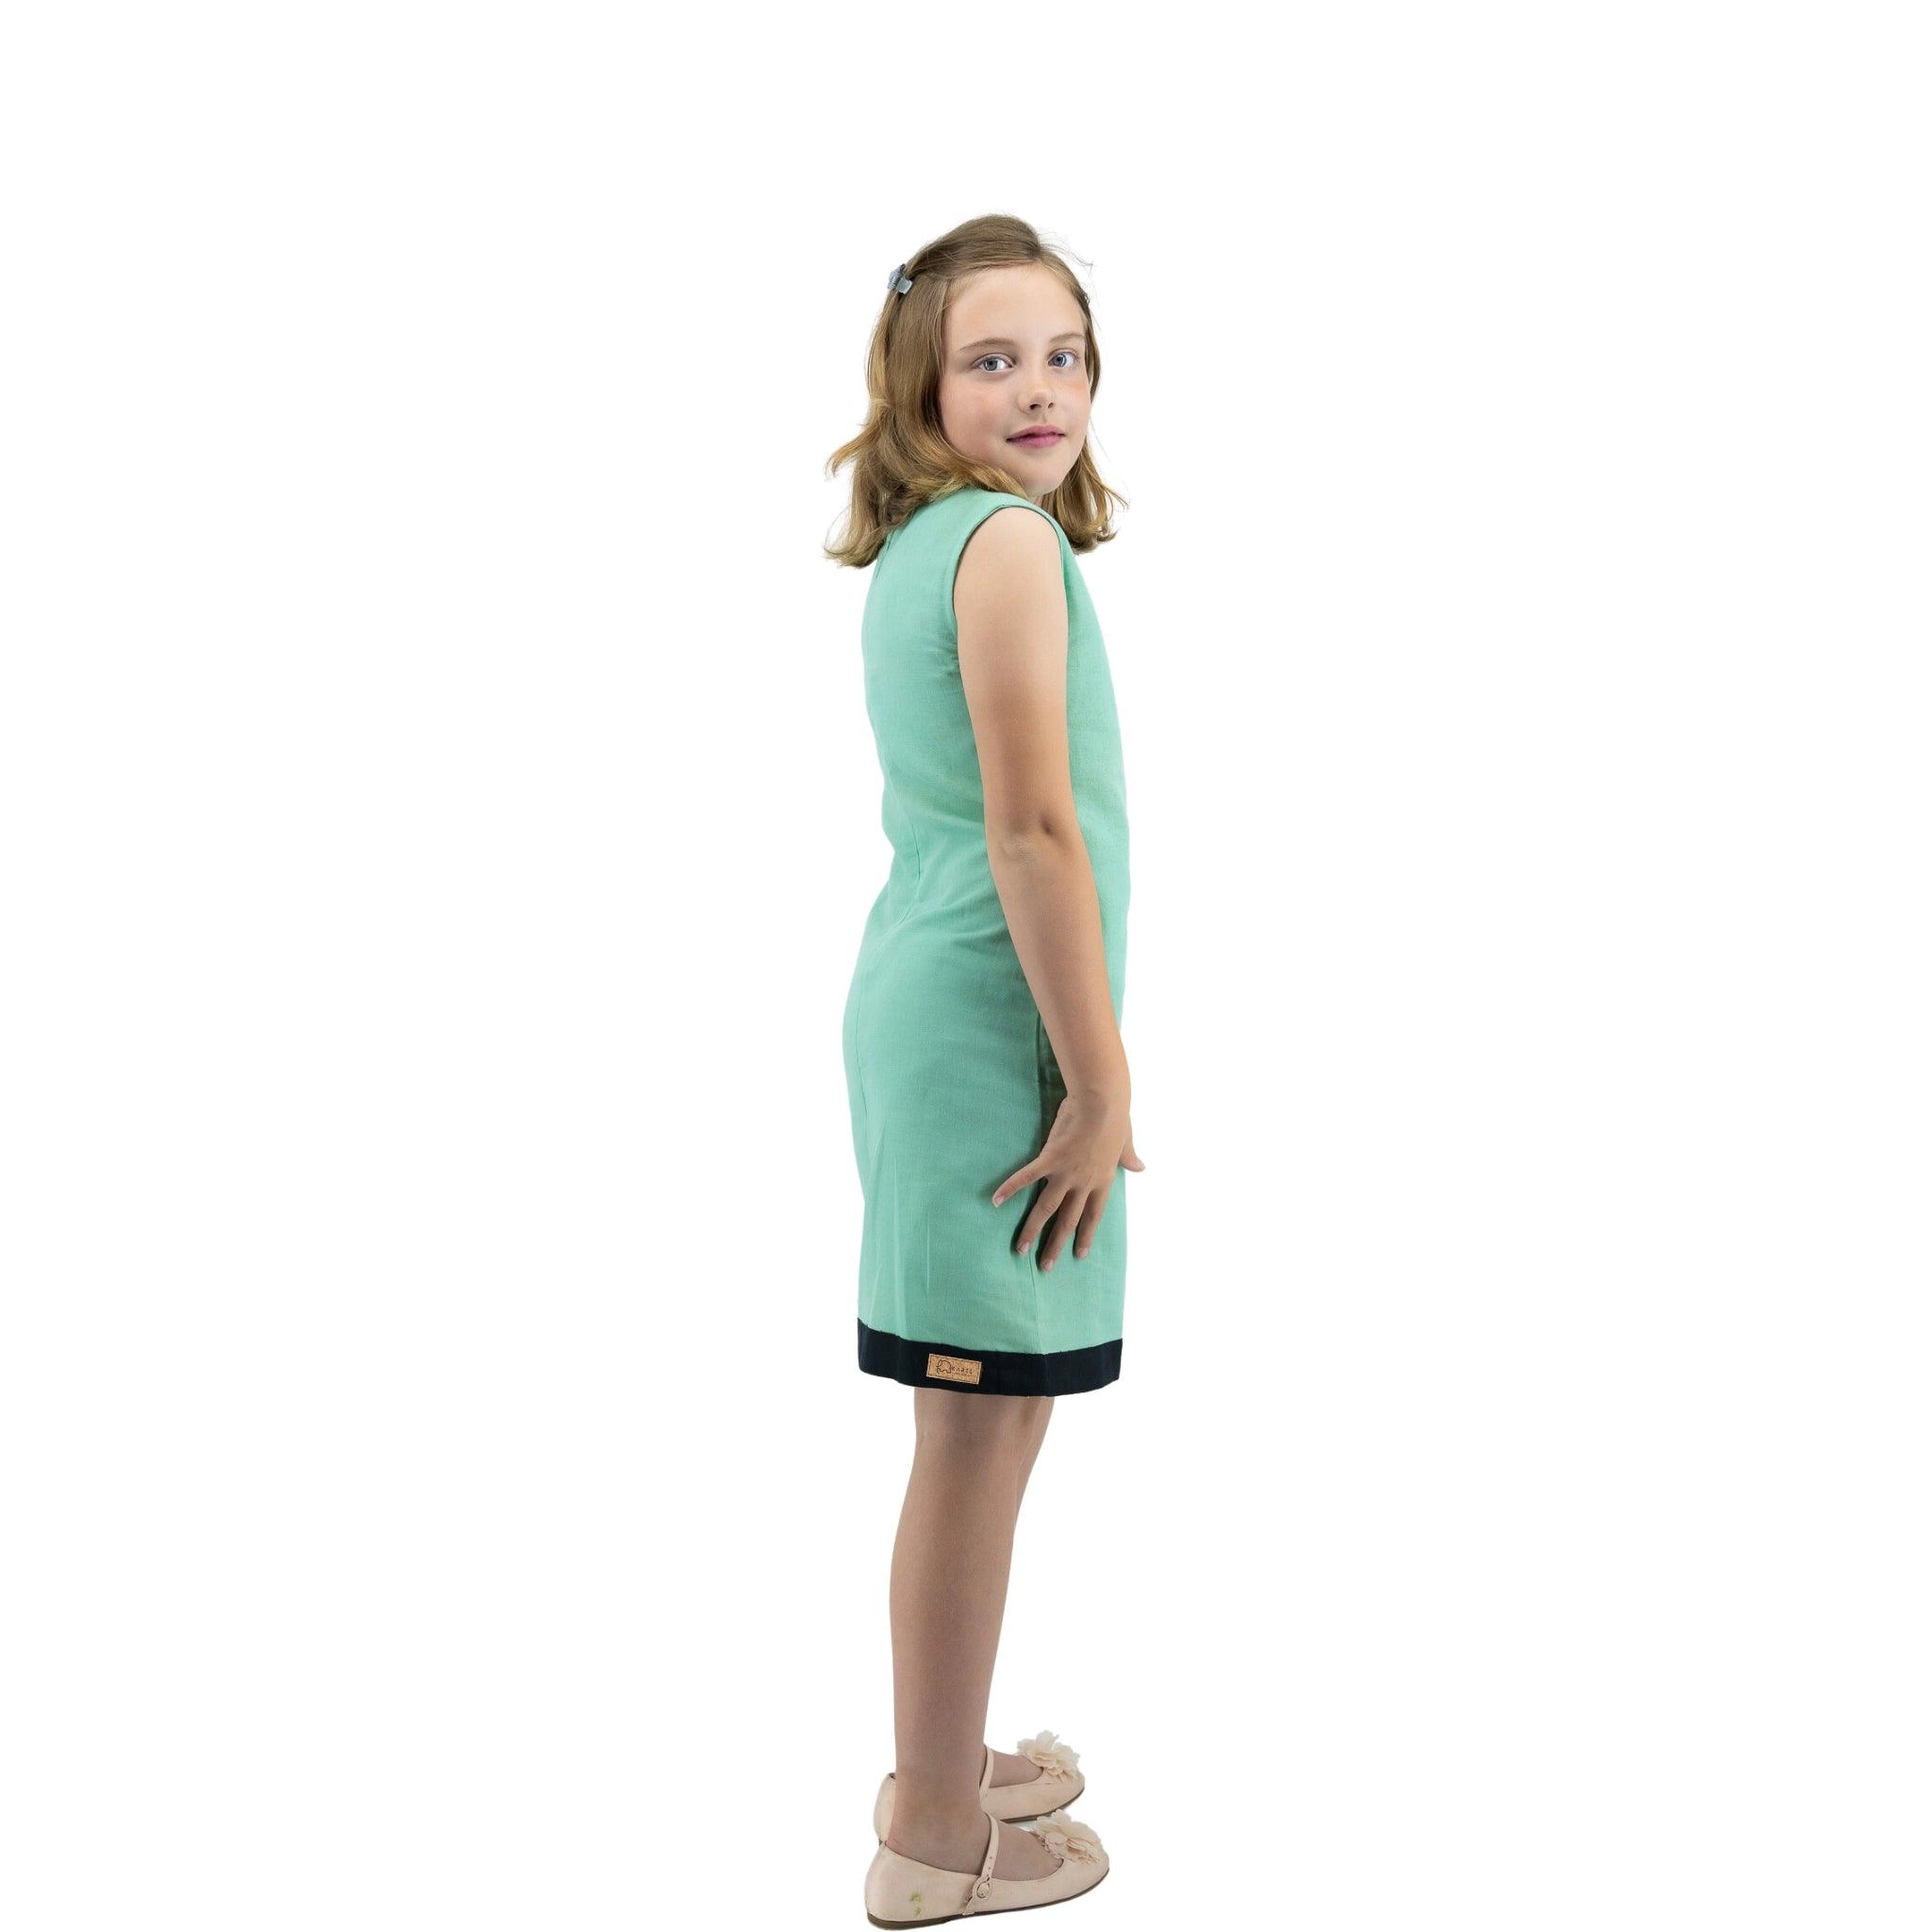 Young girl in a Karee Linen Cotton Round Neck Frock for Kids in Neptune Green and beige shoes, looking over her shoulder with a slight smile, standing against a white background.